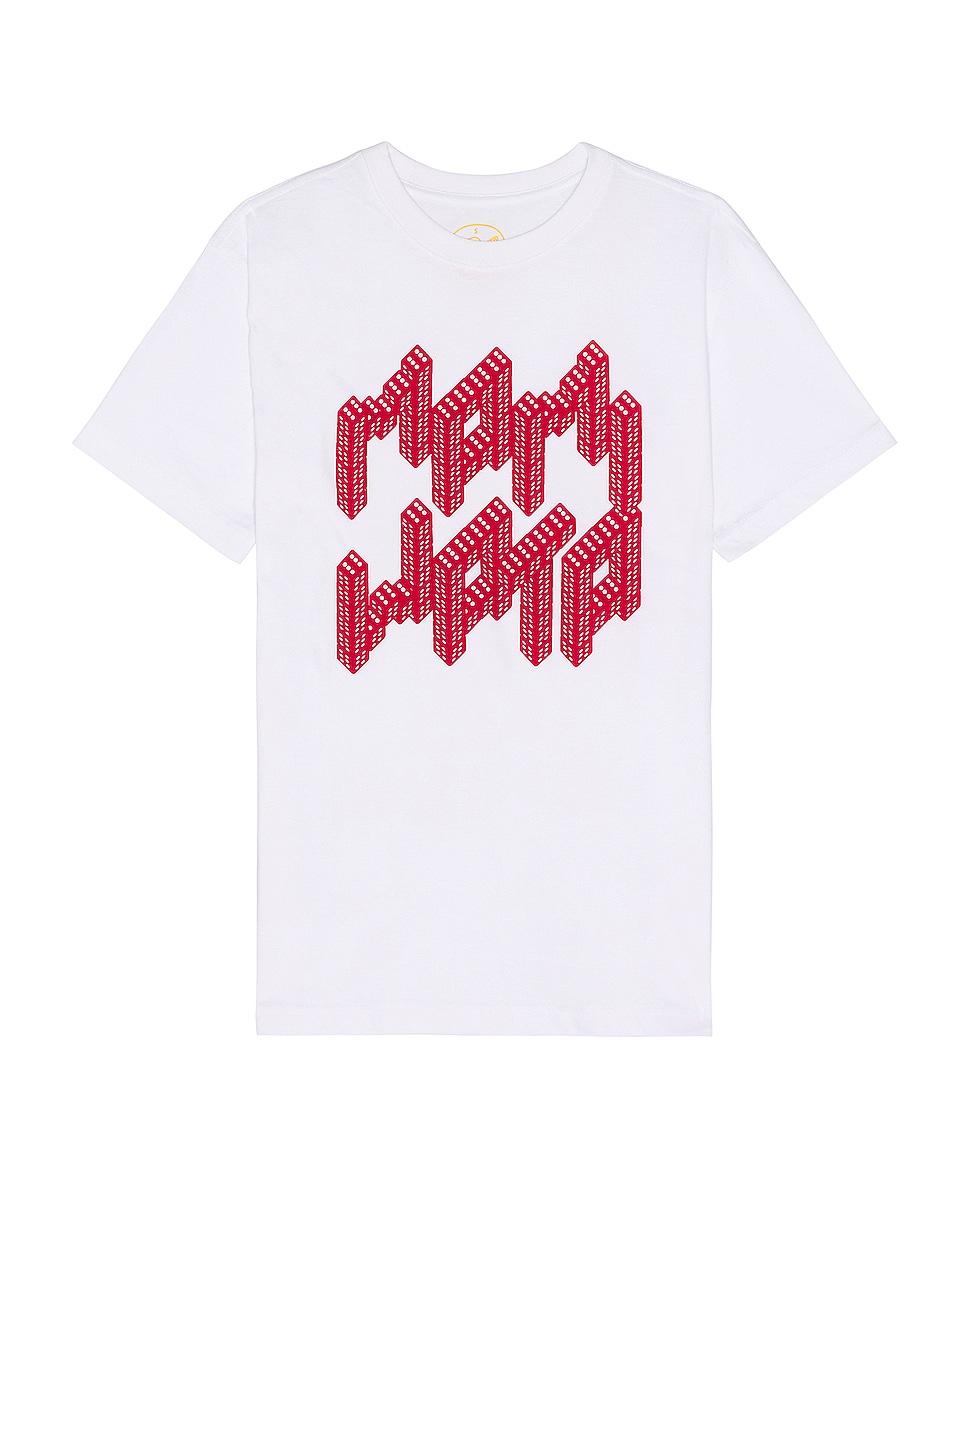 Image 1 of Mami Wata Dice Word Tee in White